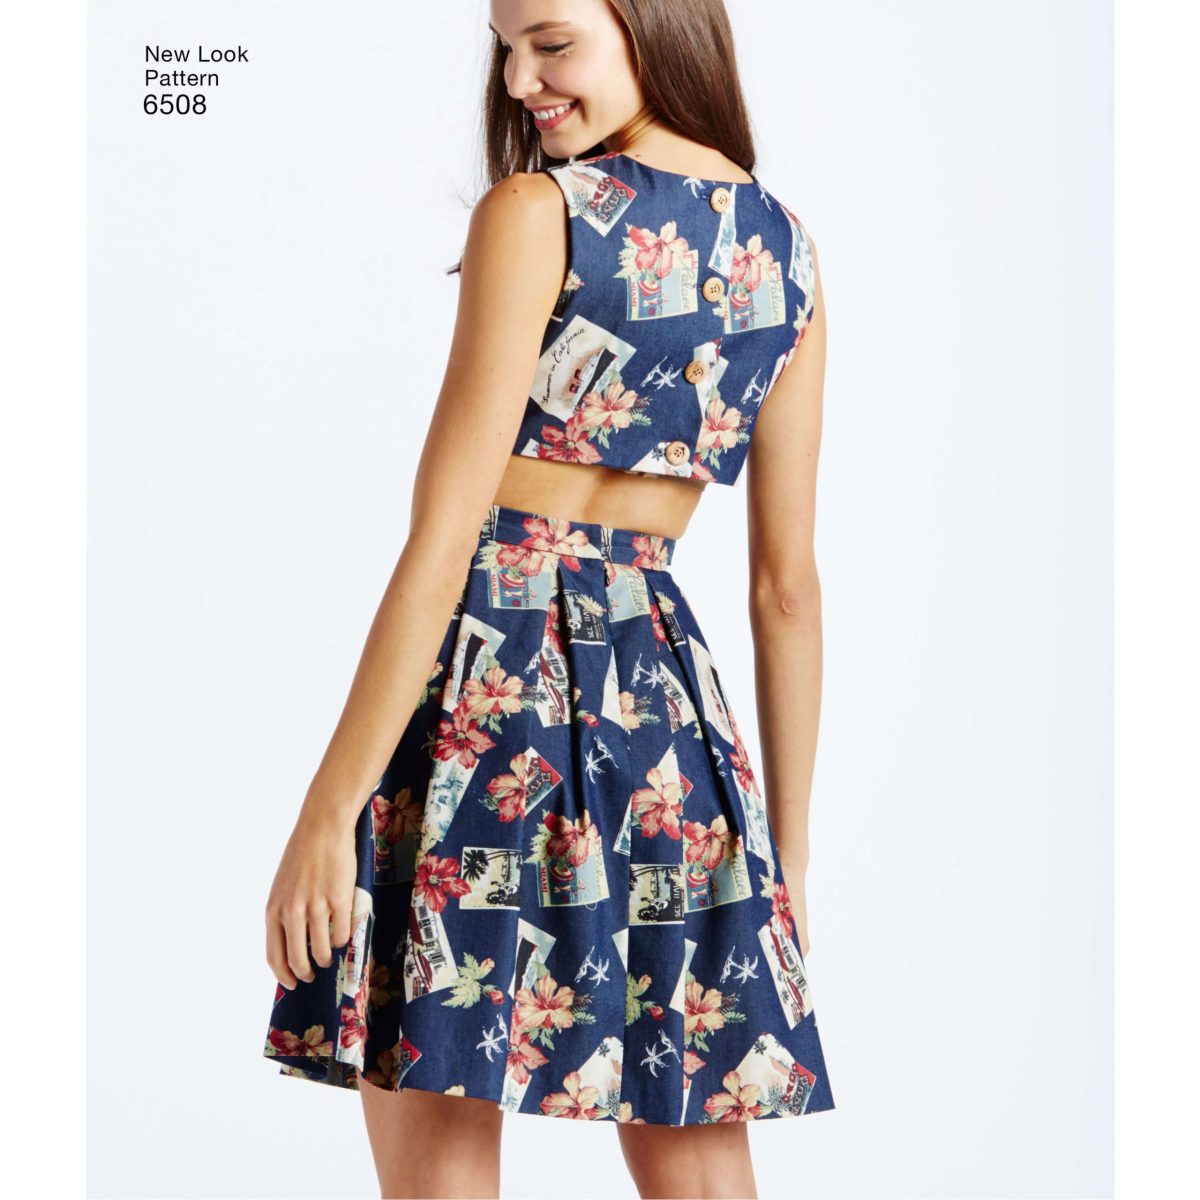 New Look Pattern 6508 Misses' Dress with Open or Closed Back Variations